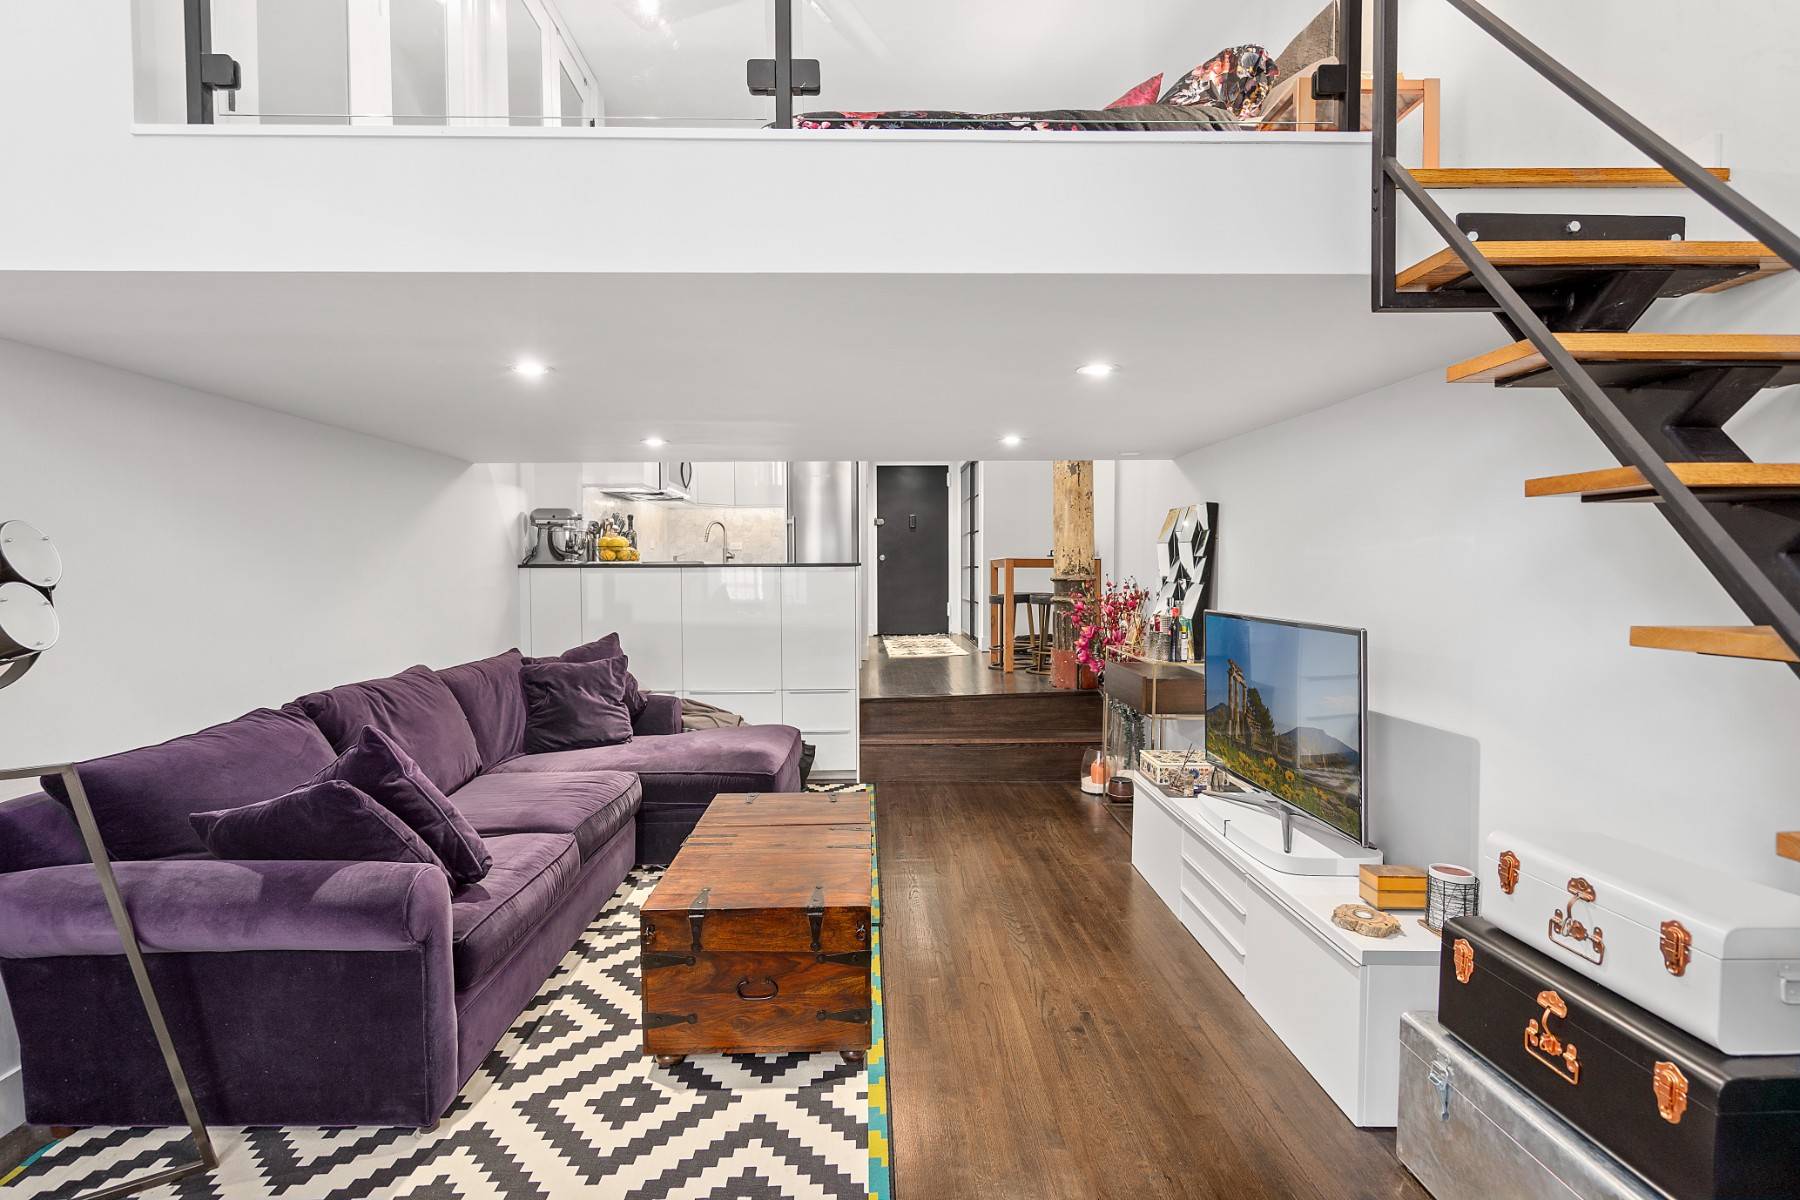 2W is a charming, retrofitted loft elegantly designed with modern renovations.